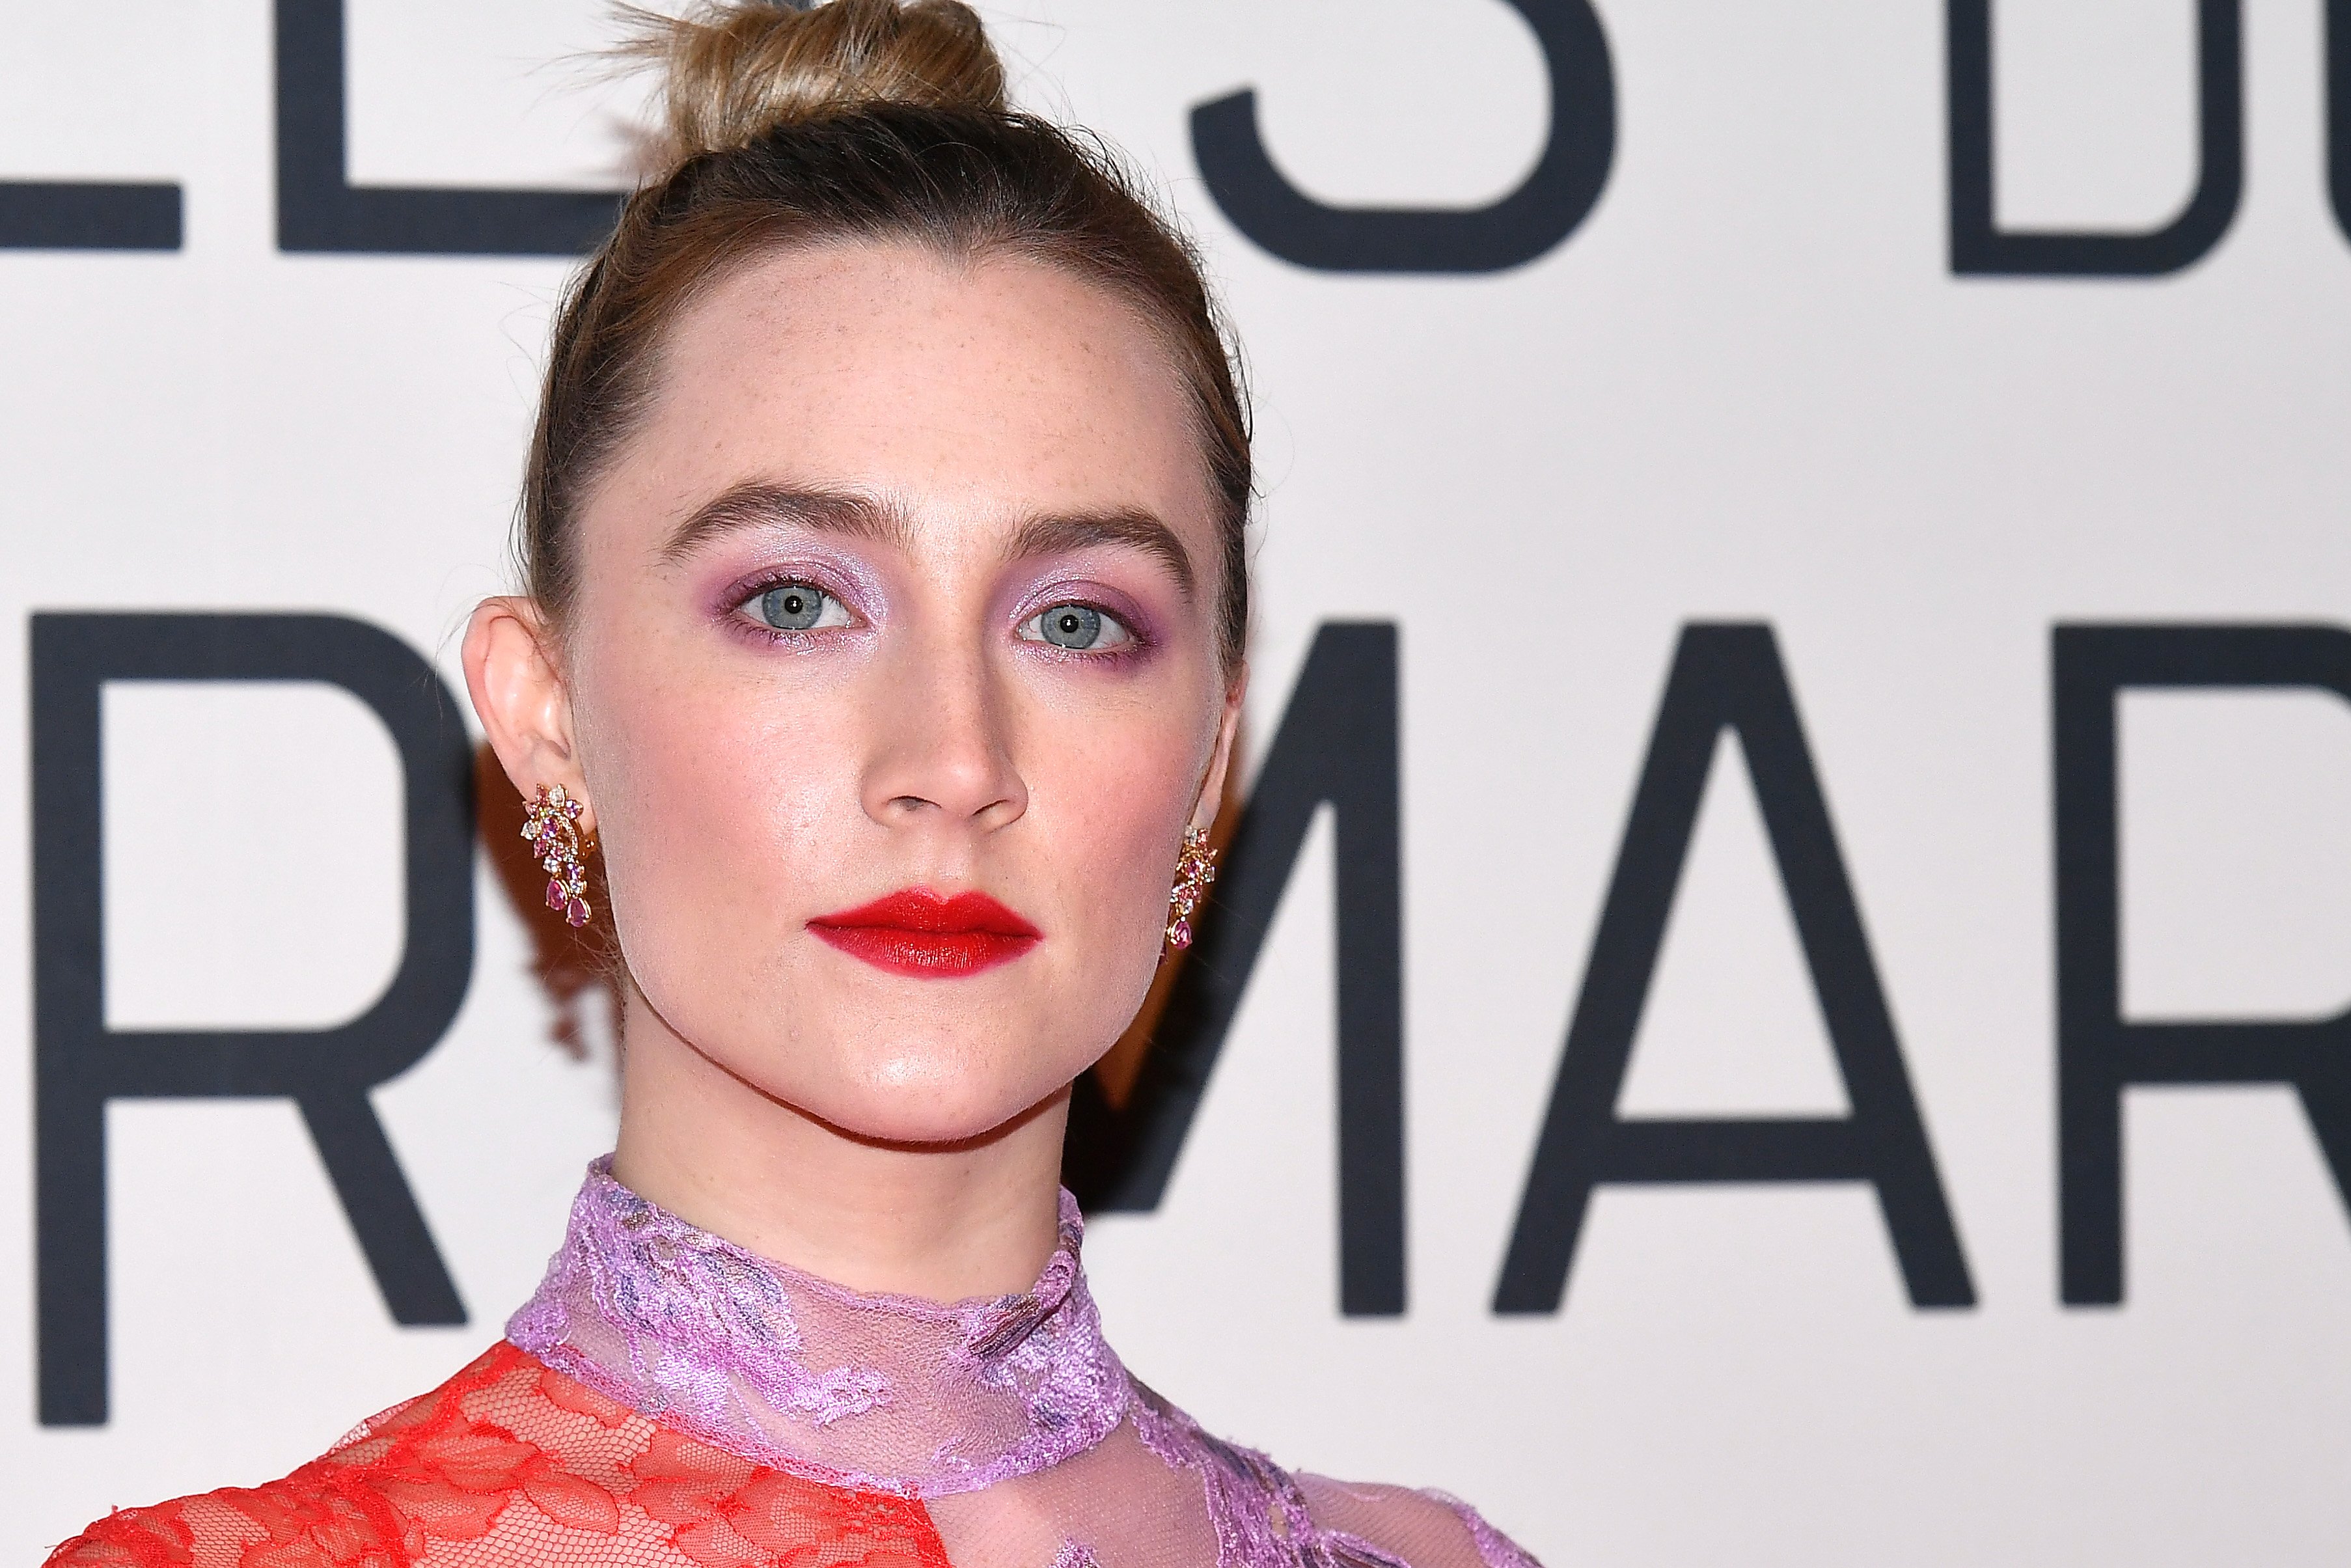 Actress Saoirse Ronan will star in the 2020 film  "Ammonite" with veteran actress Kate Winslet. | Photo: Getty Images